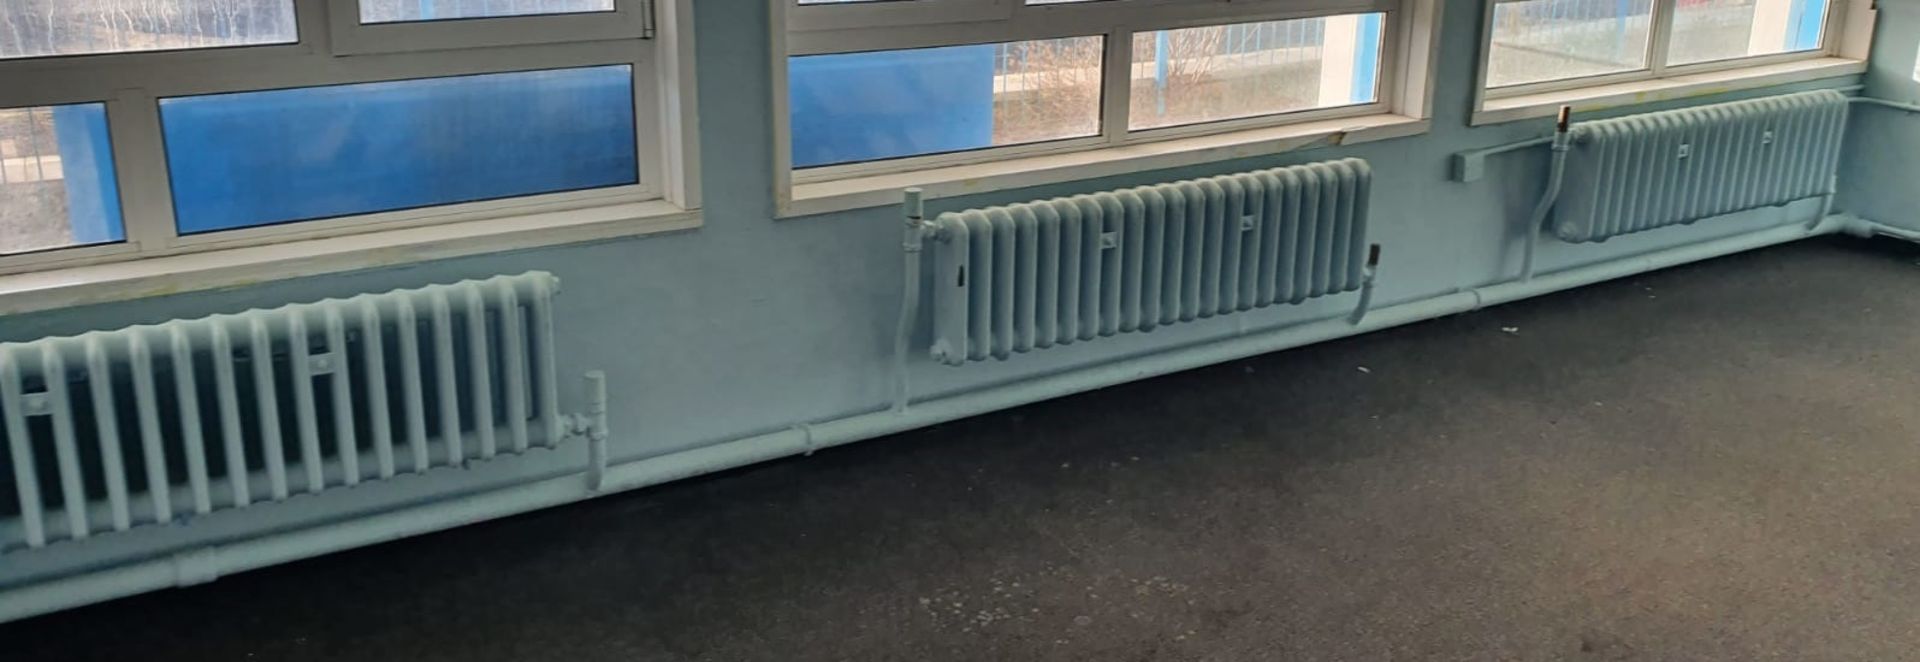 Approx 50 x Cast Iron Panelled Radiators - Various Sizes Included - CL483 - Location: Folkestone - Image 29 of 29